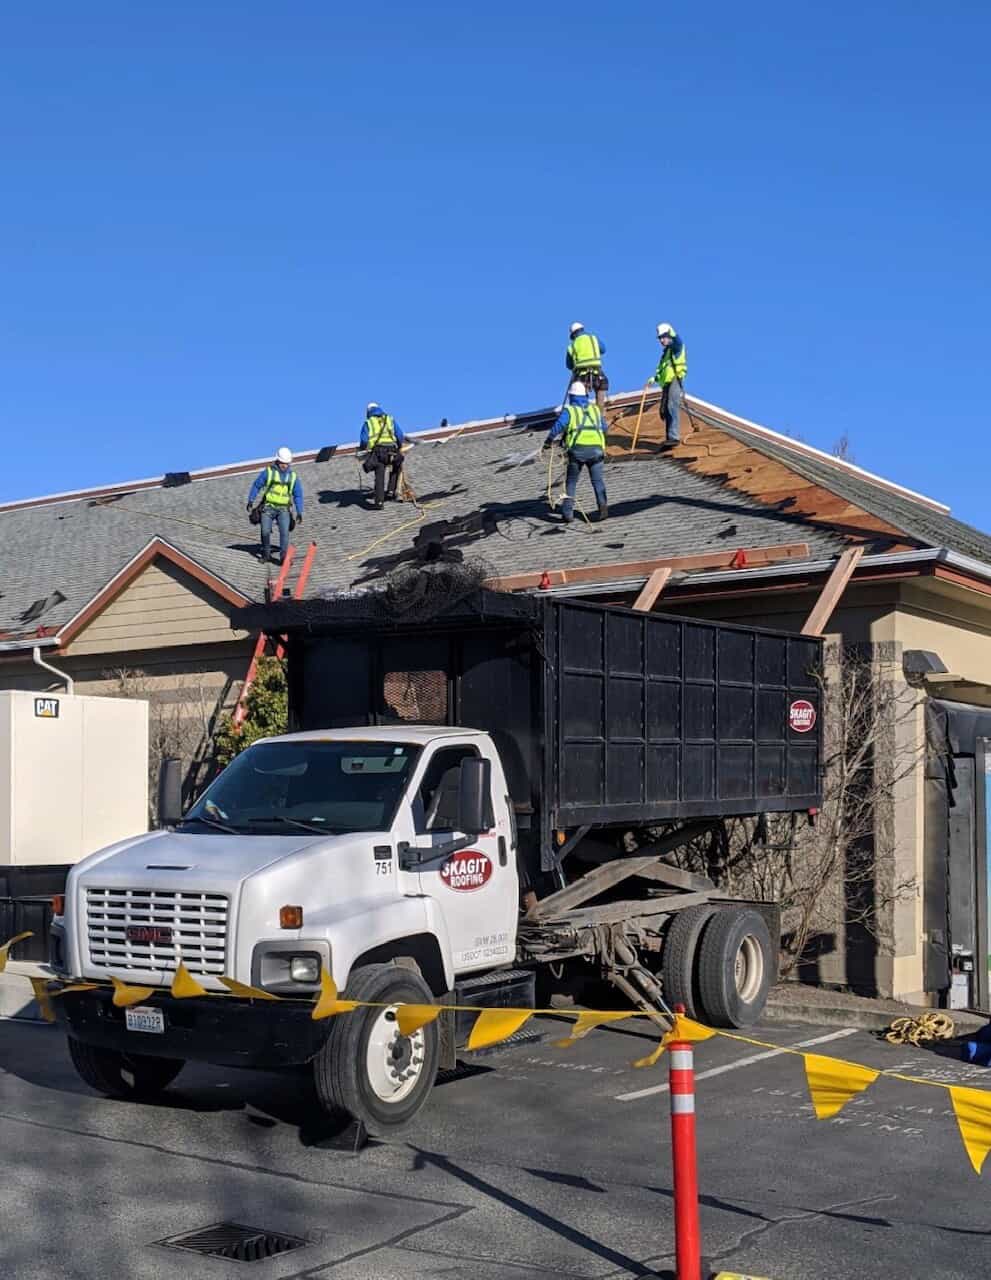 Team of roofers standing on a roof, assembling that roof